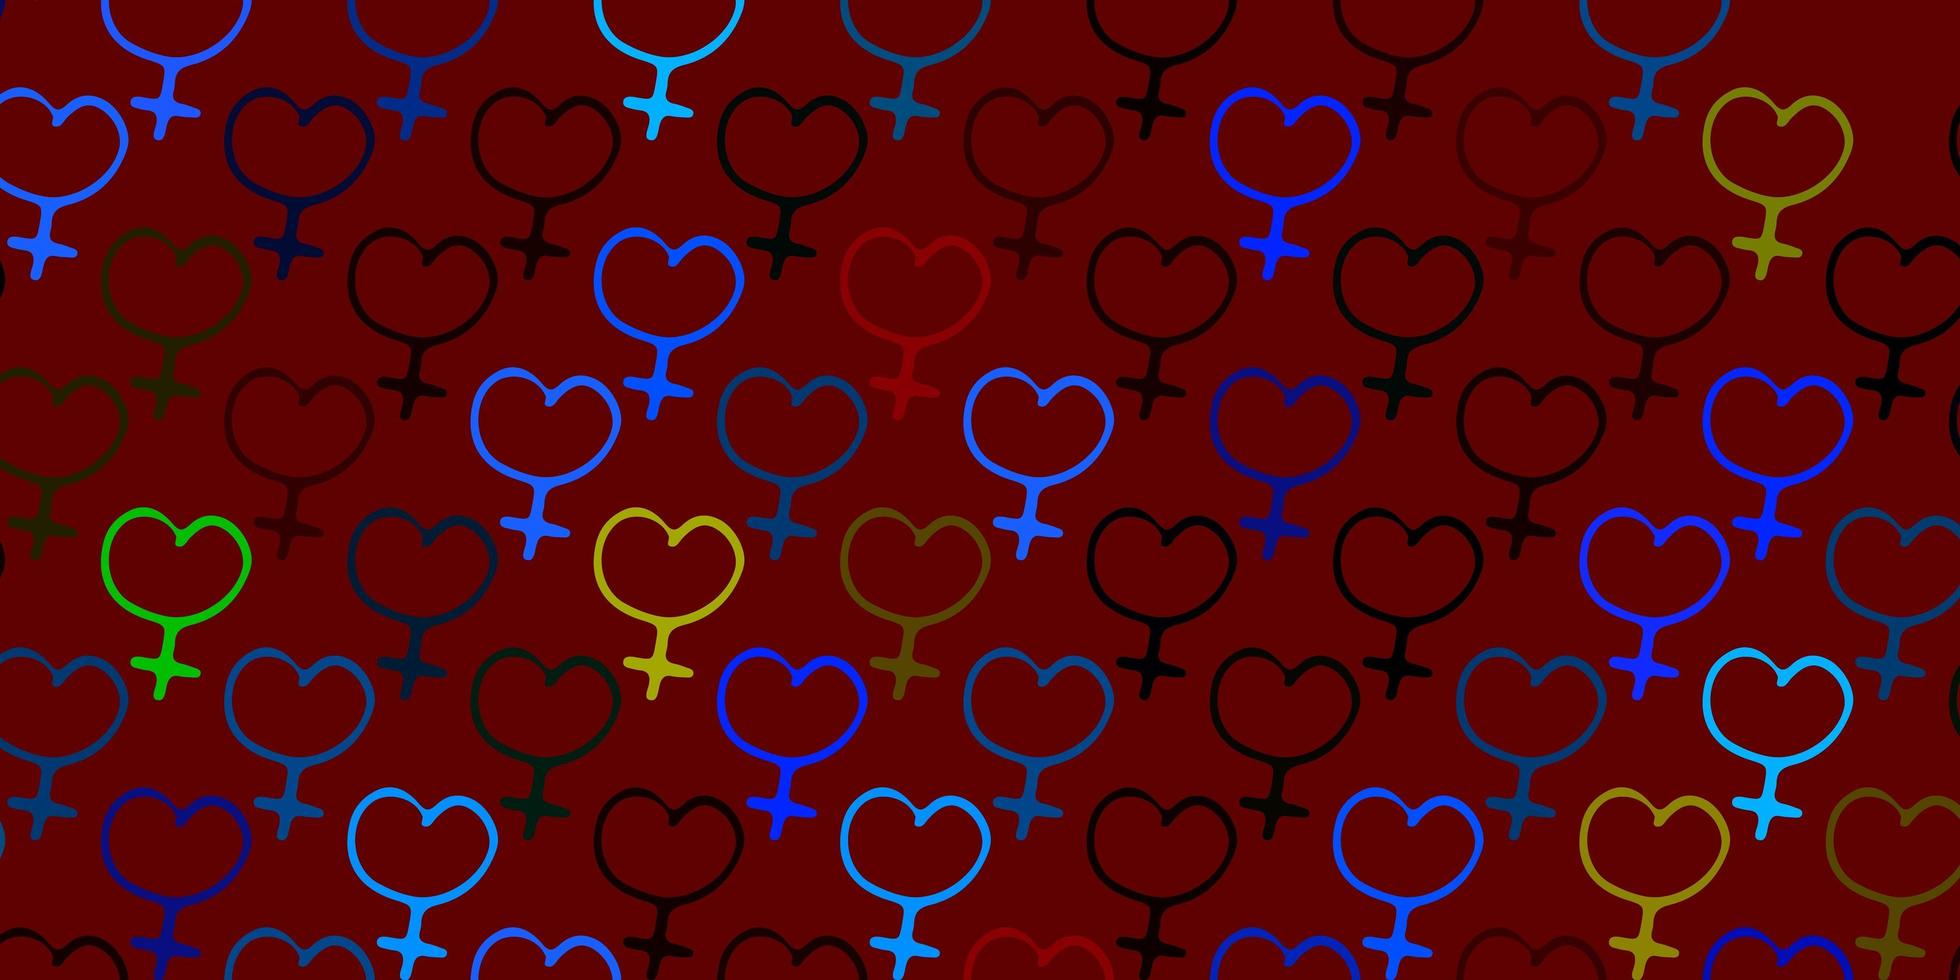 Light Multicolor vector pattern with feminism elements.